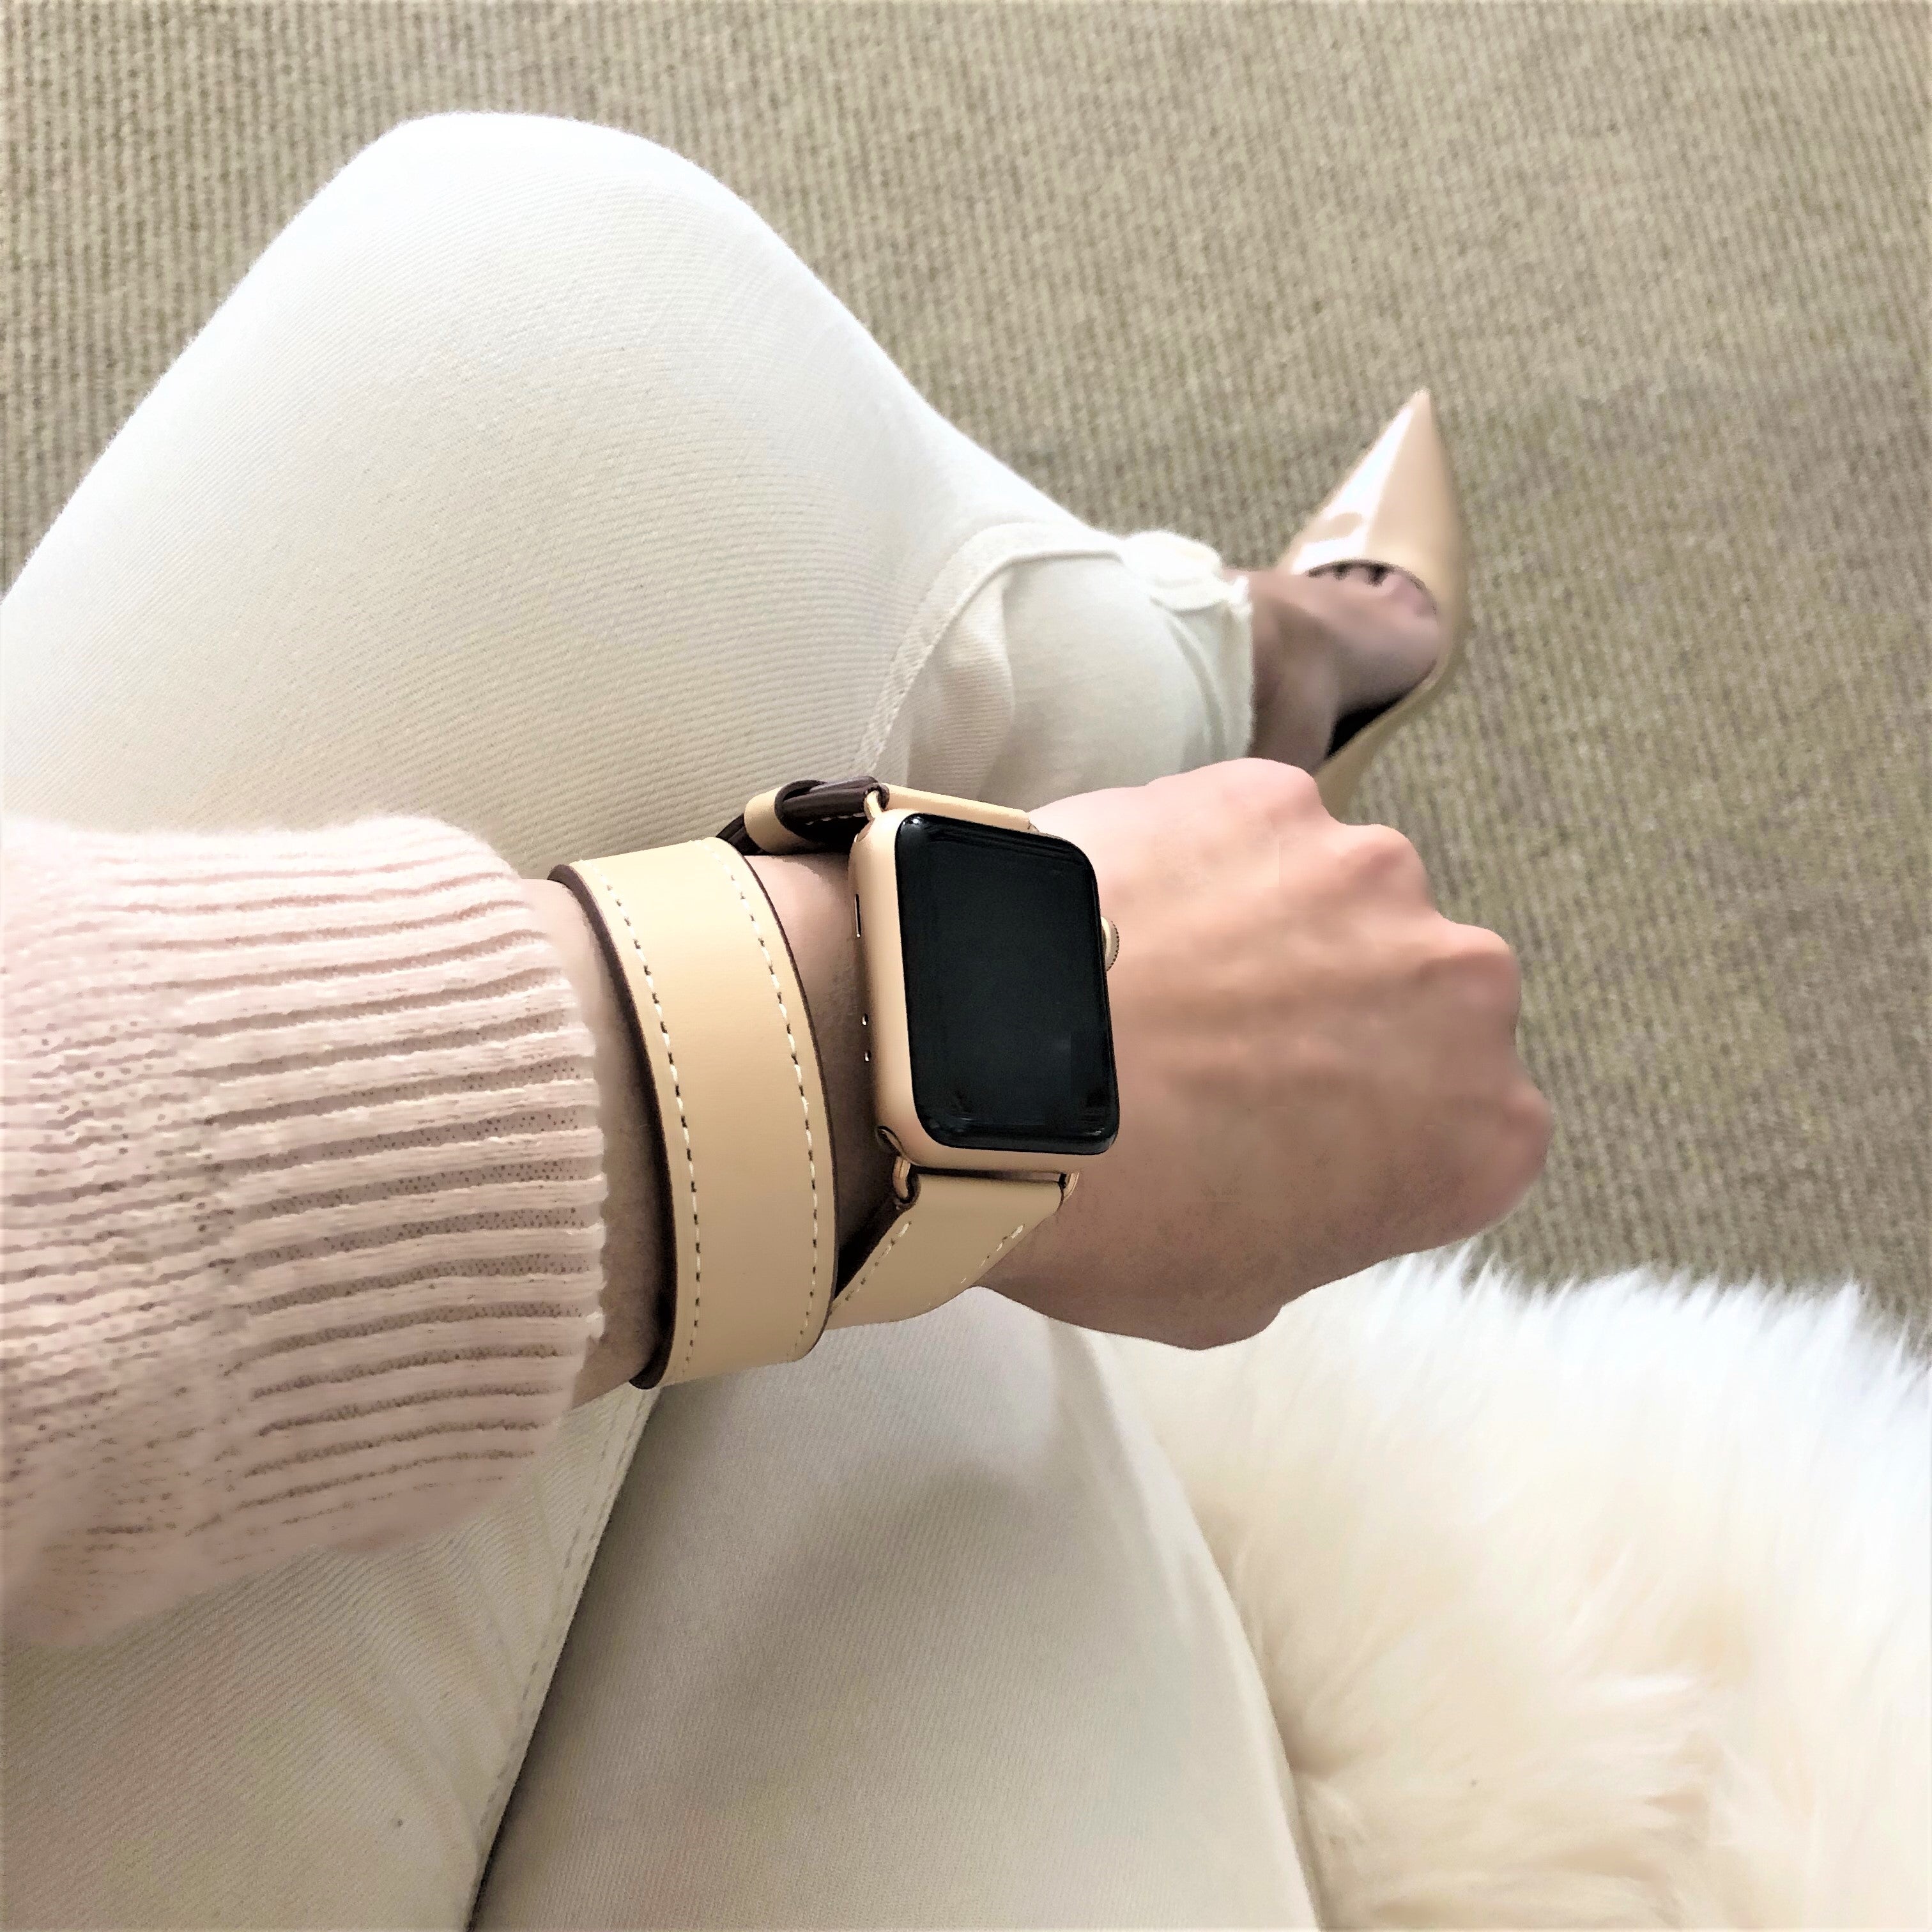 Blush Rose Double Wrap Apple Watch Leather Band for Women by Juxli Home.  Handmade, stylish leather strap with rose gold hardware on a 40mm Apple watch on a canvas with a black and gray painting.